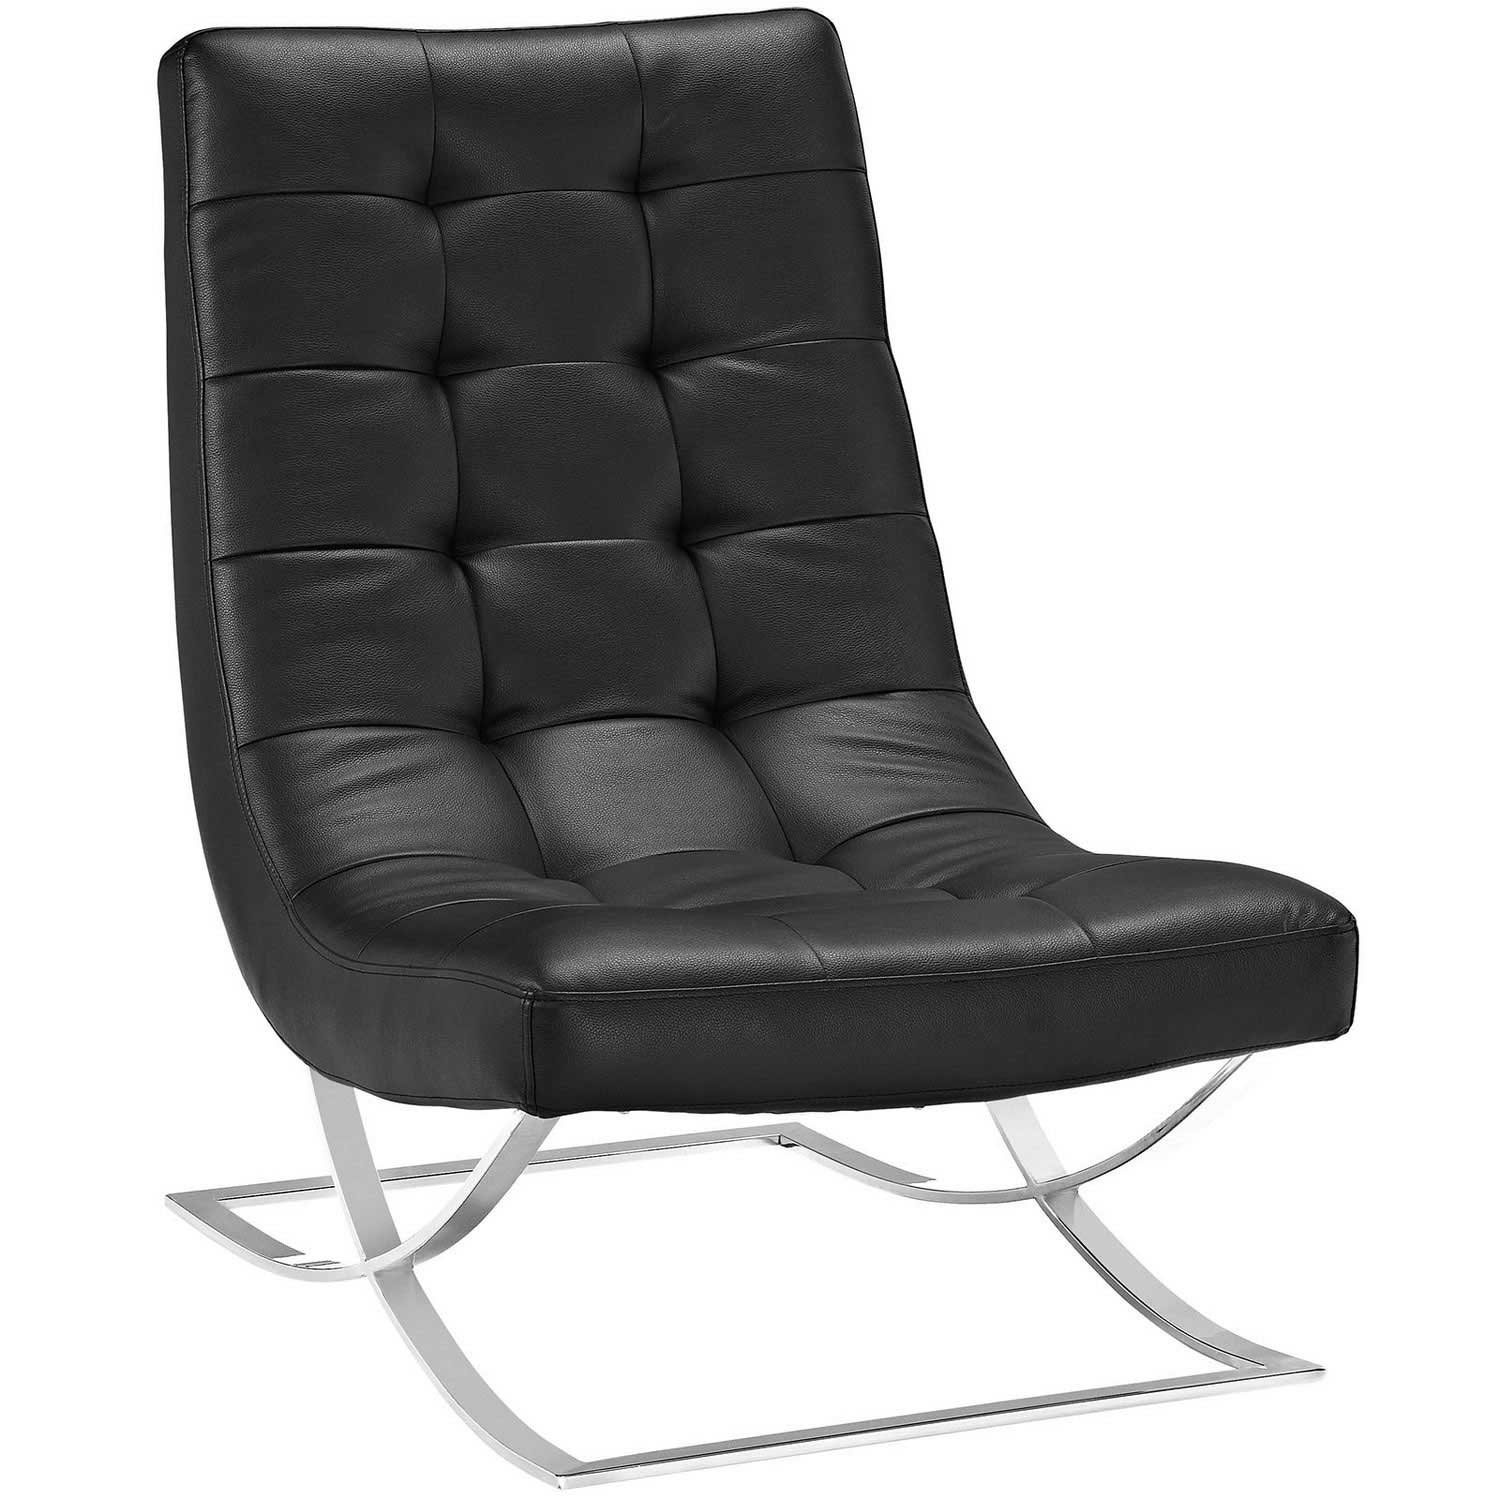 Modway Slope Lounge Chair - Black